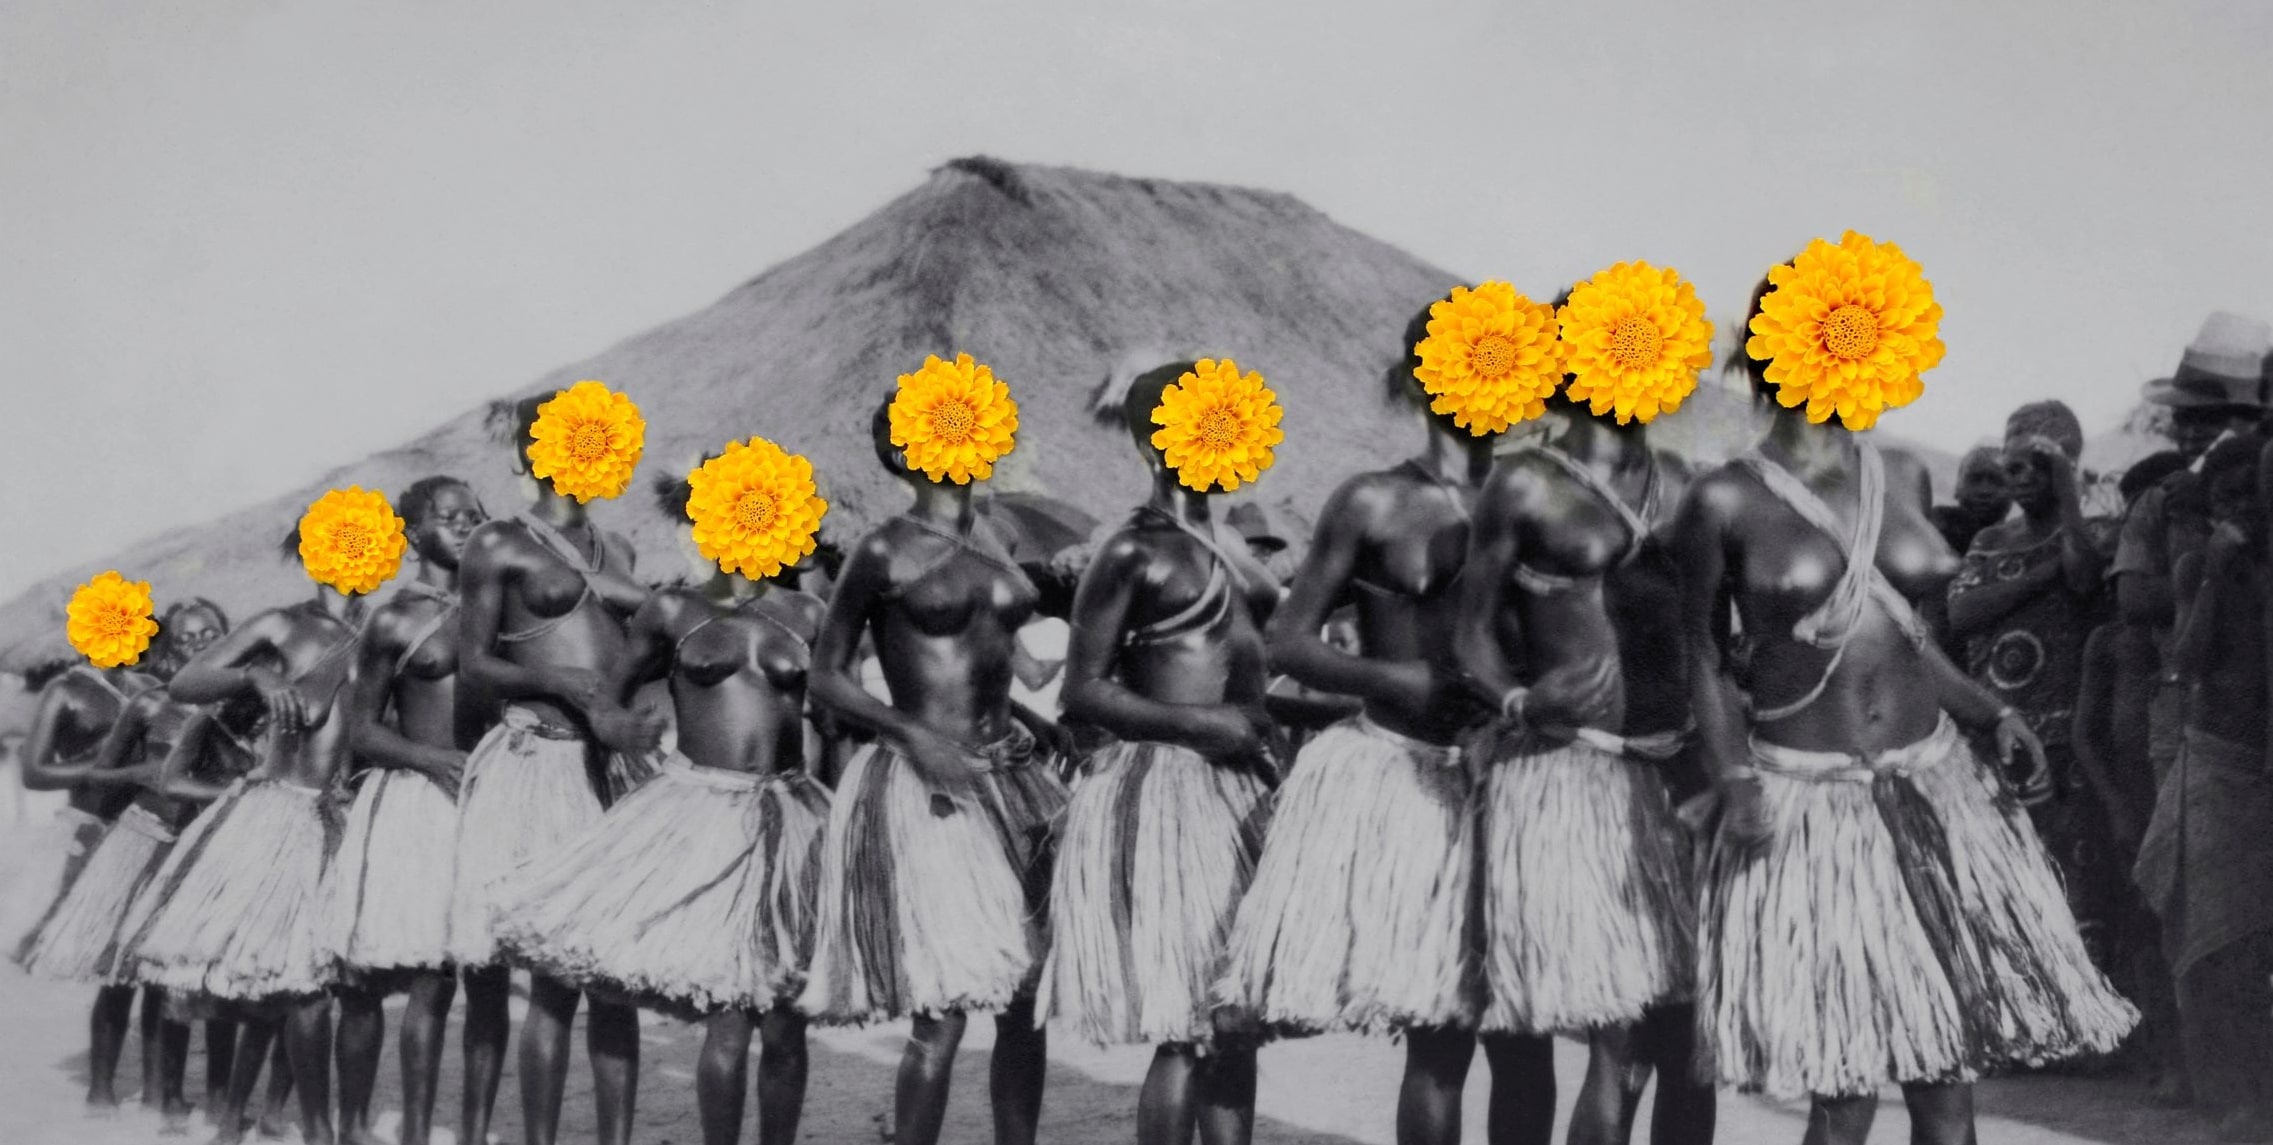 Zeitz MOCAA presents One Thousand Voices, an exhibition by Owanto